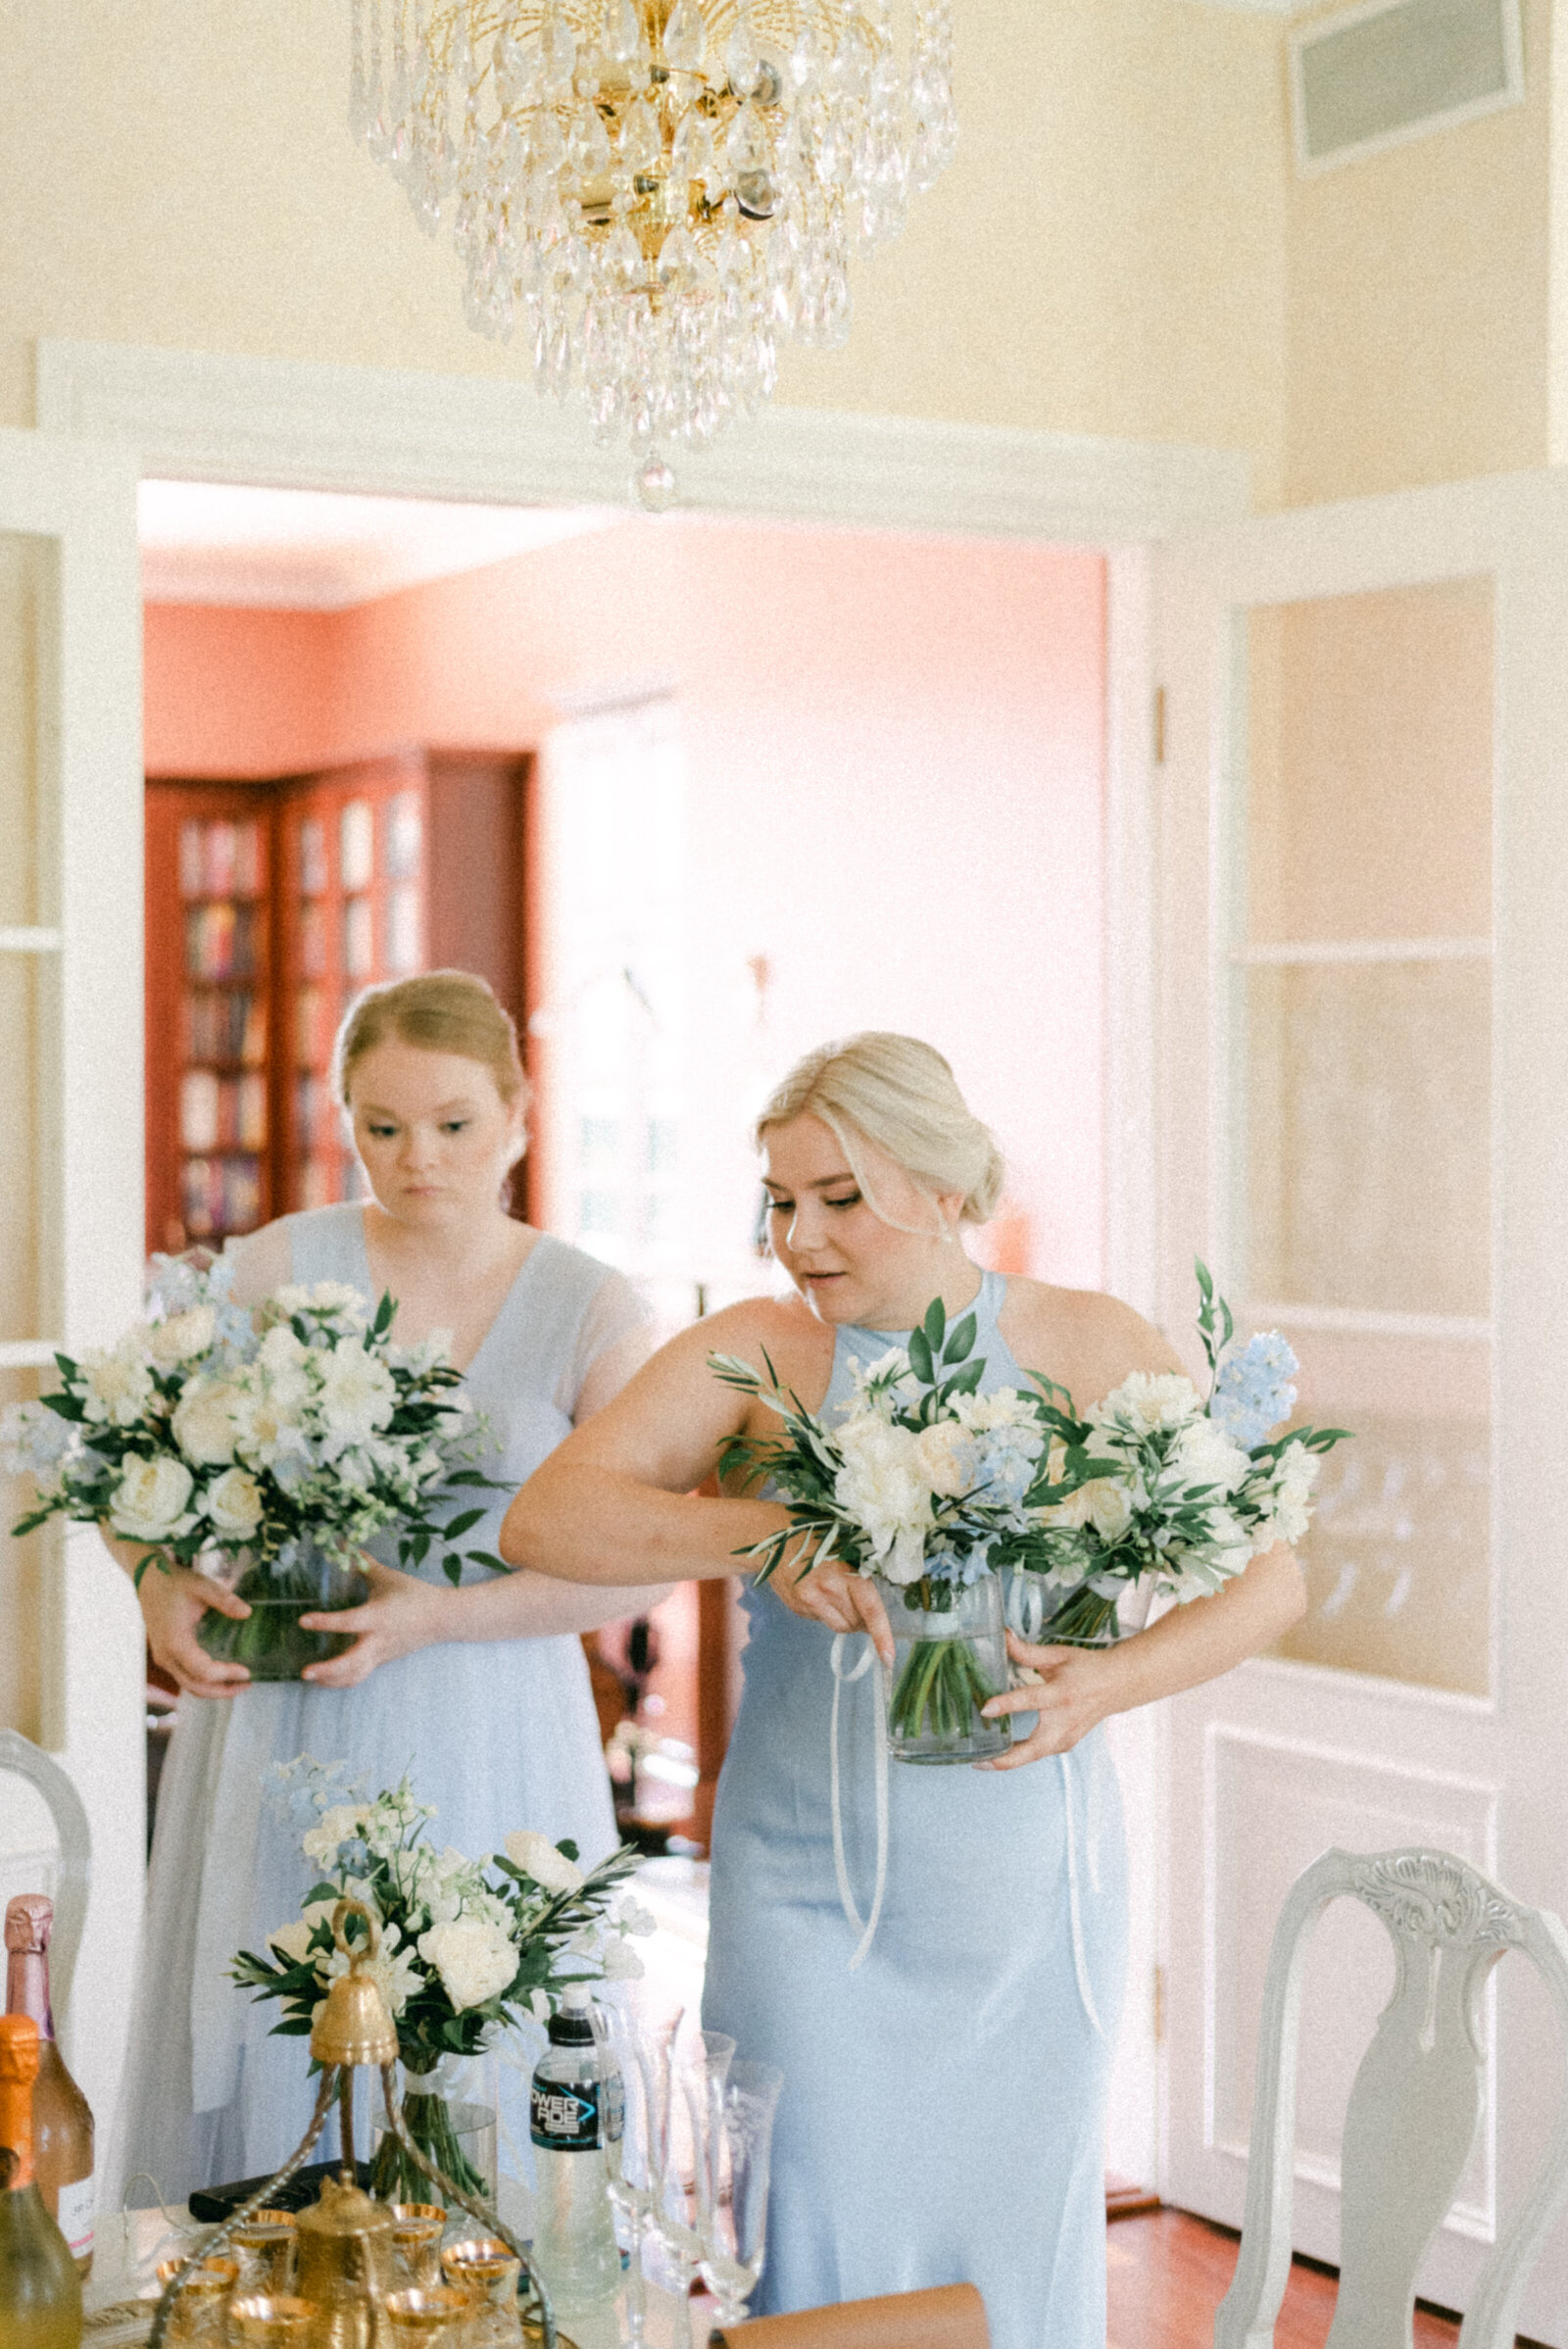 Bridesmaids bringing the wedding florals in an image photographed by wedding photographer Hannika Gabrielsson.